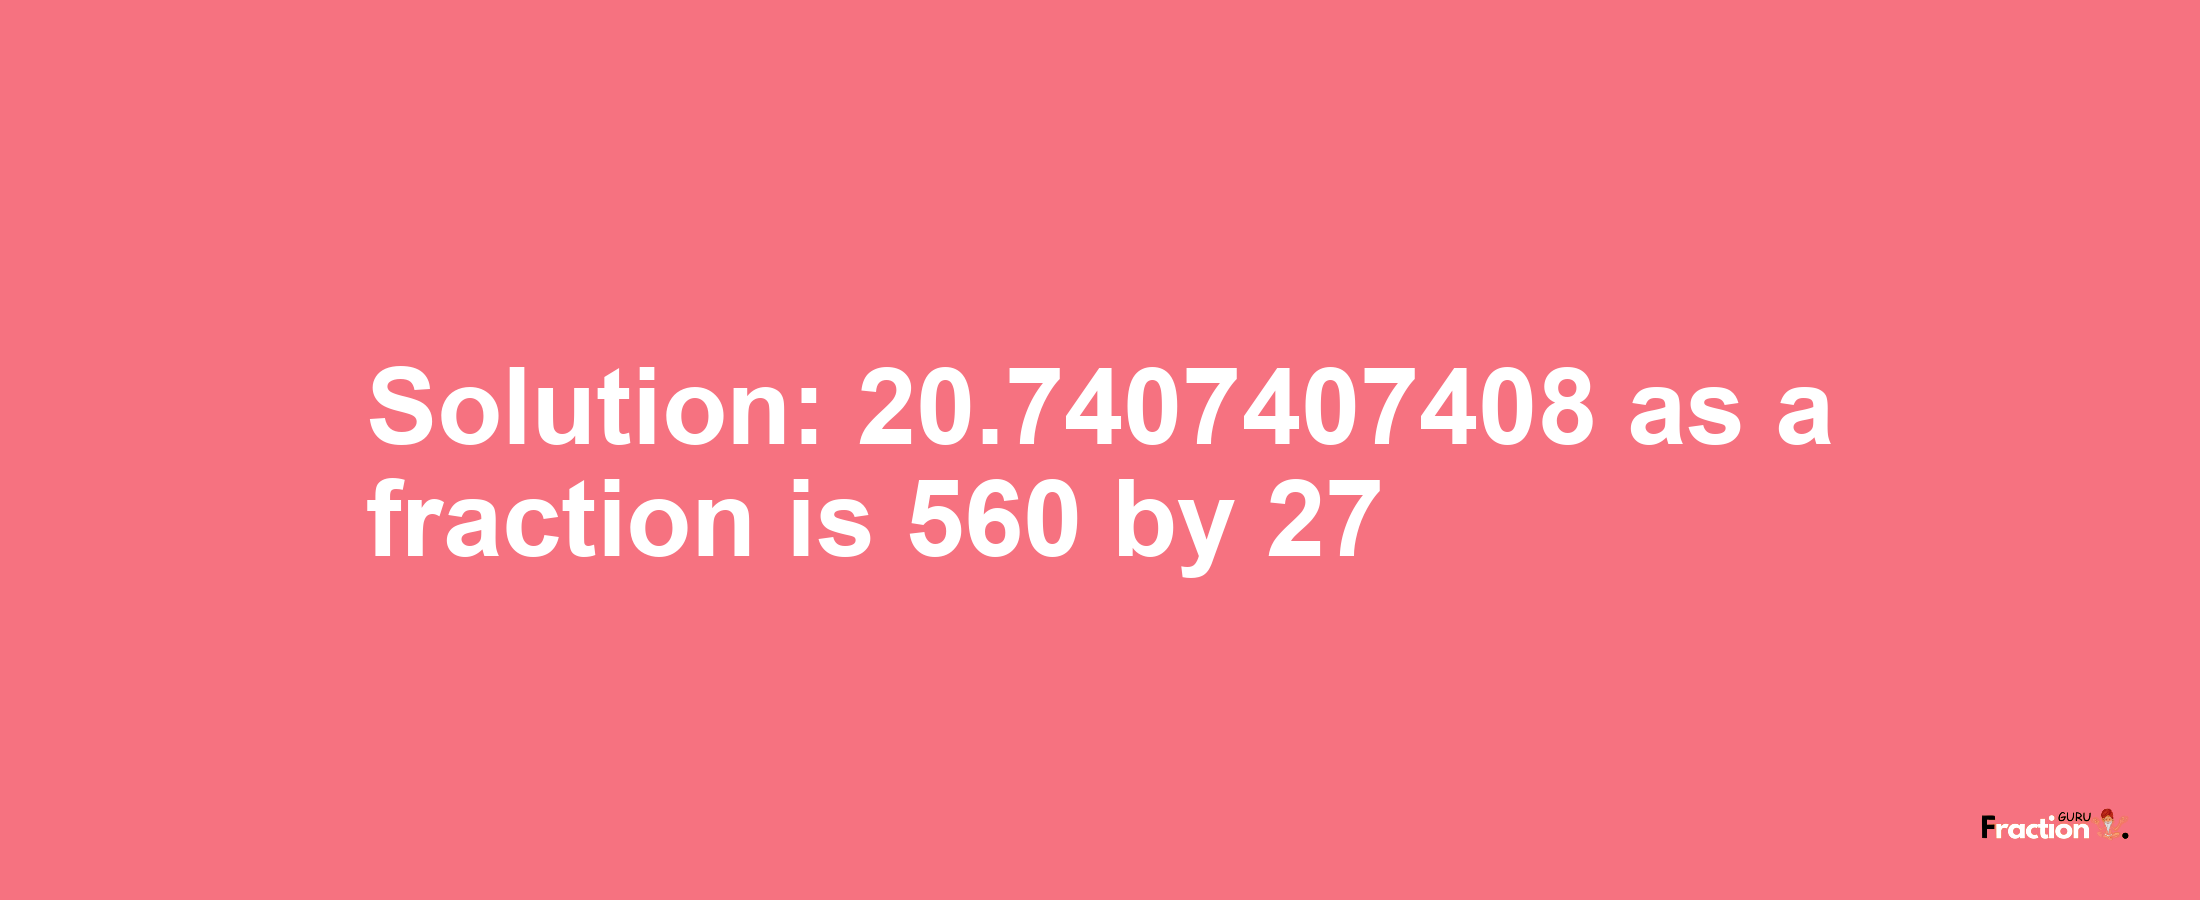 Solution:20.7407407408 as a fraction is 560/27